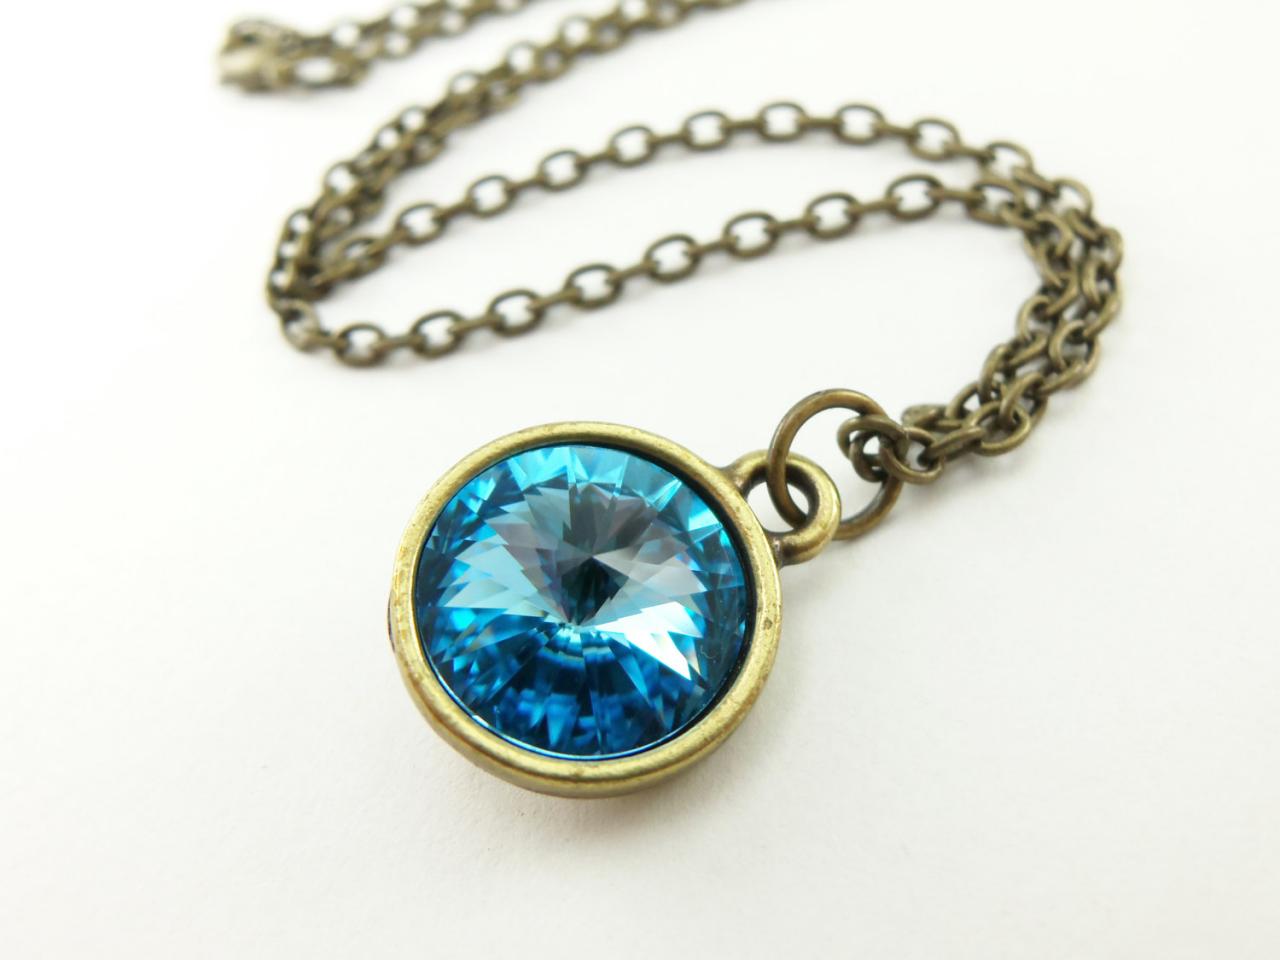 Aqua Crystal Necklace March Birthstone Jewelry Antiqued Brass Necklace Aqua Crystal Pendant